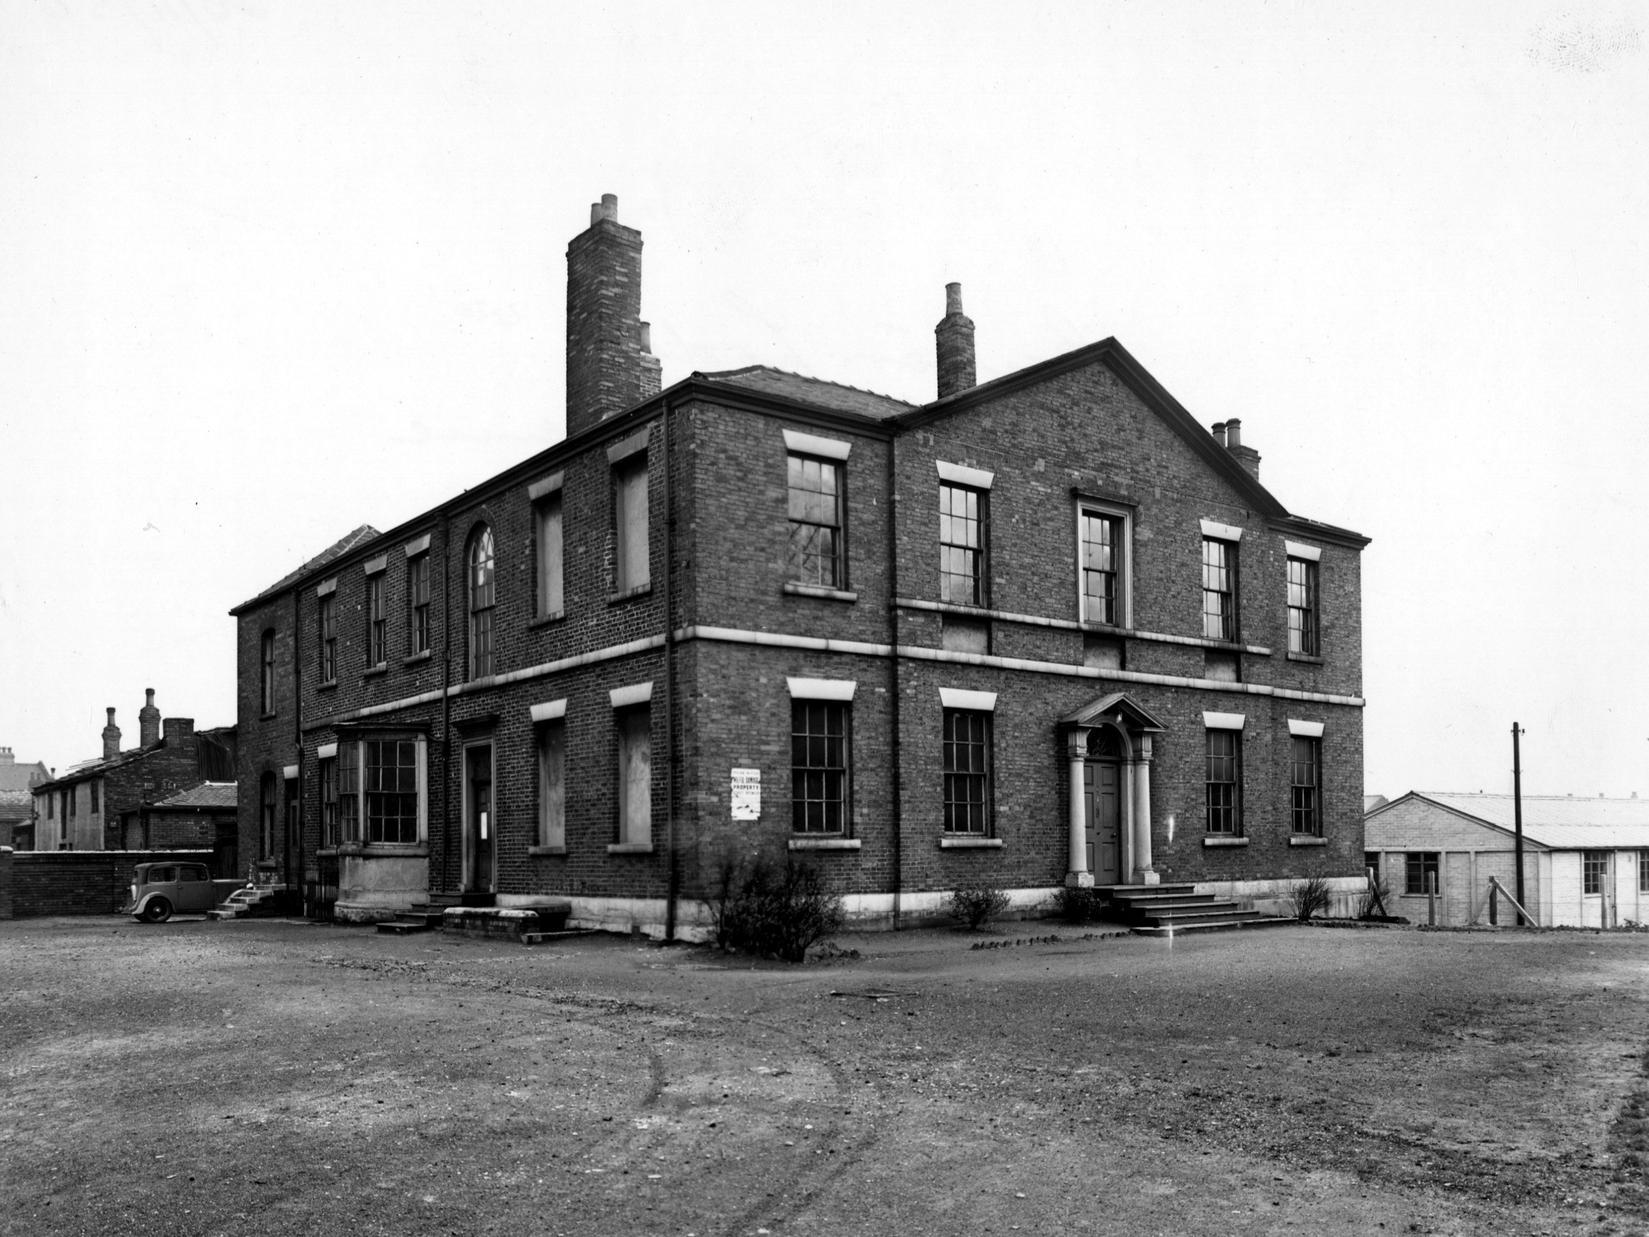 Burton Lodge on Burton Avenue off Dewsbury Road in Hunslet. The building is a large Georgian house with an extension to the rear. A parked car can be seen on the left.